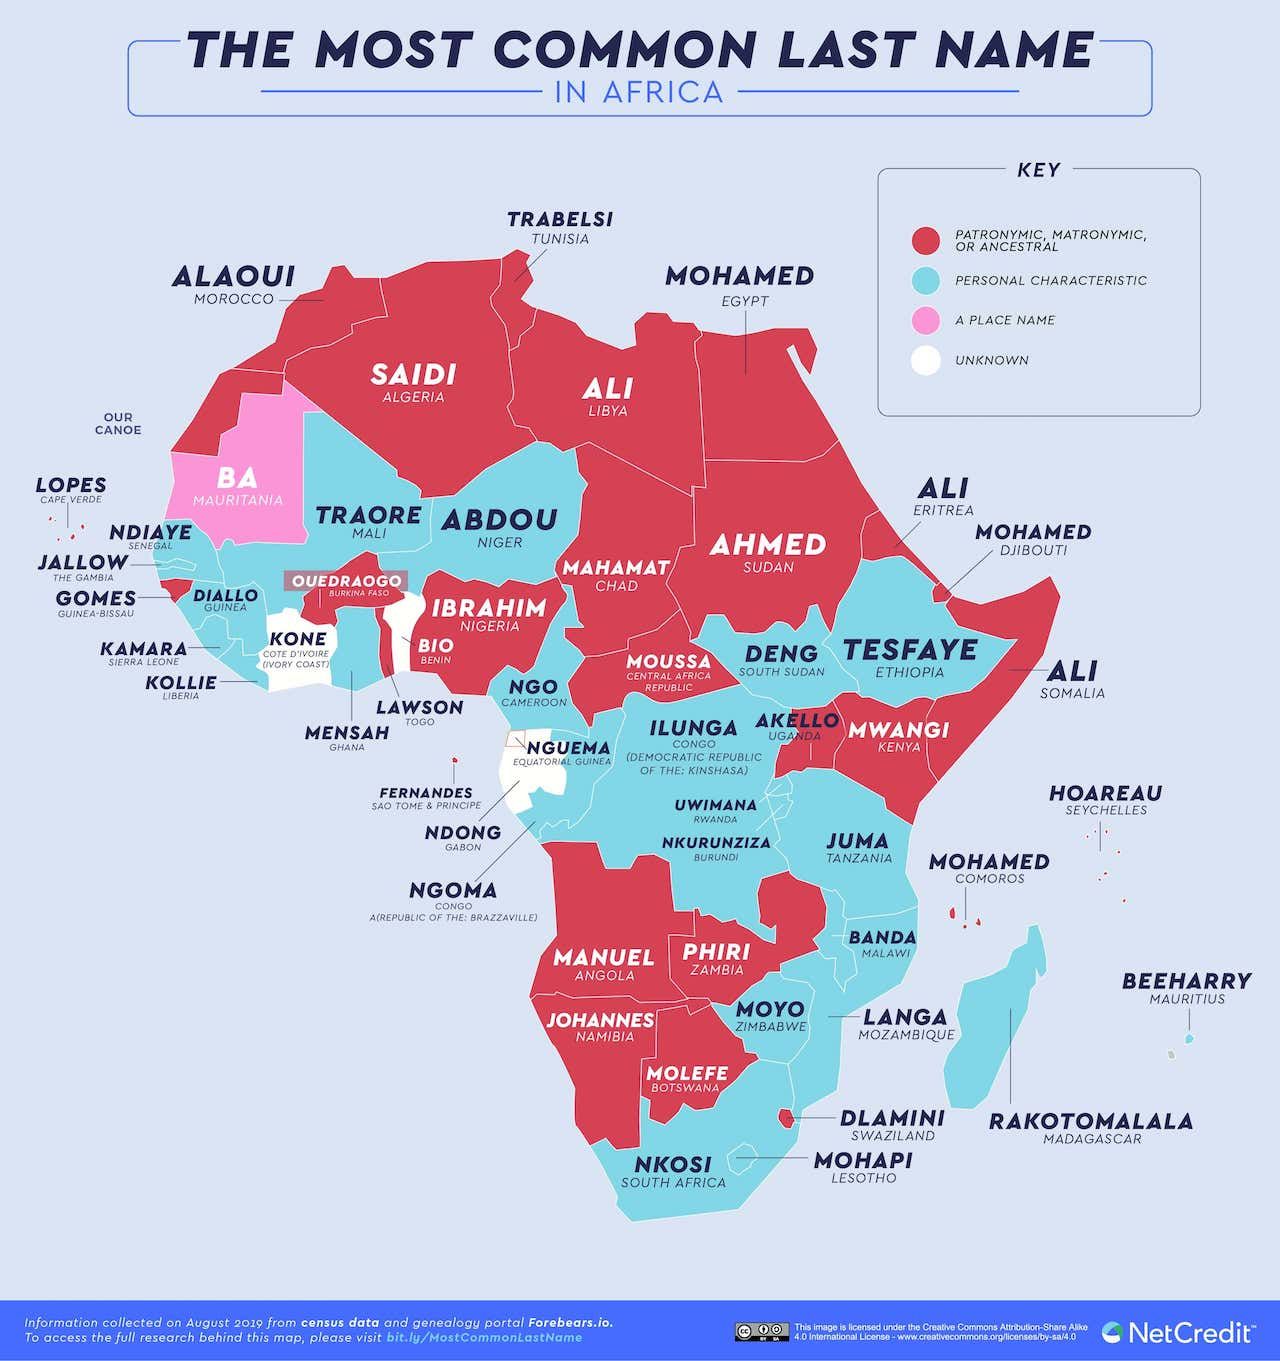 02_The-most-common-last-name-in-every-country_Africa.jpg